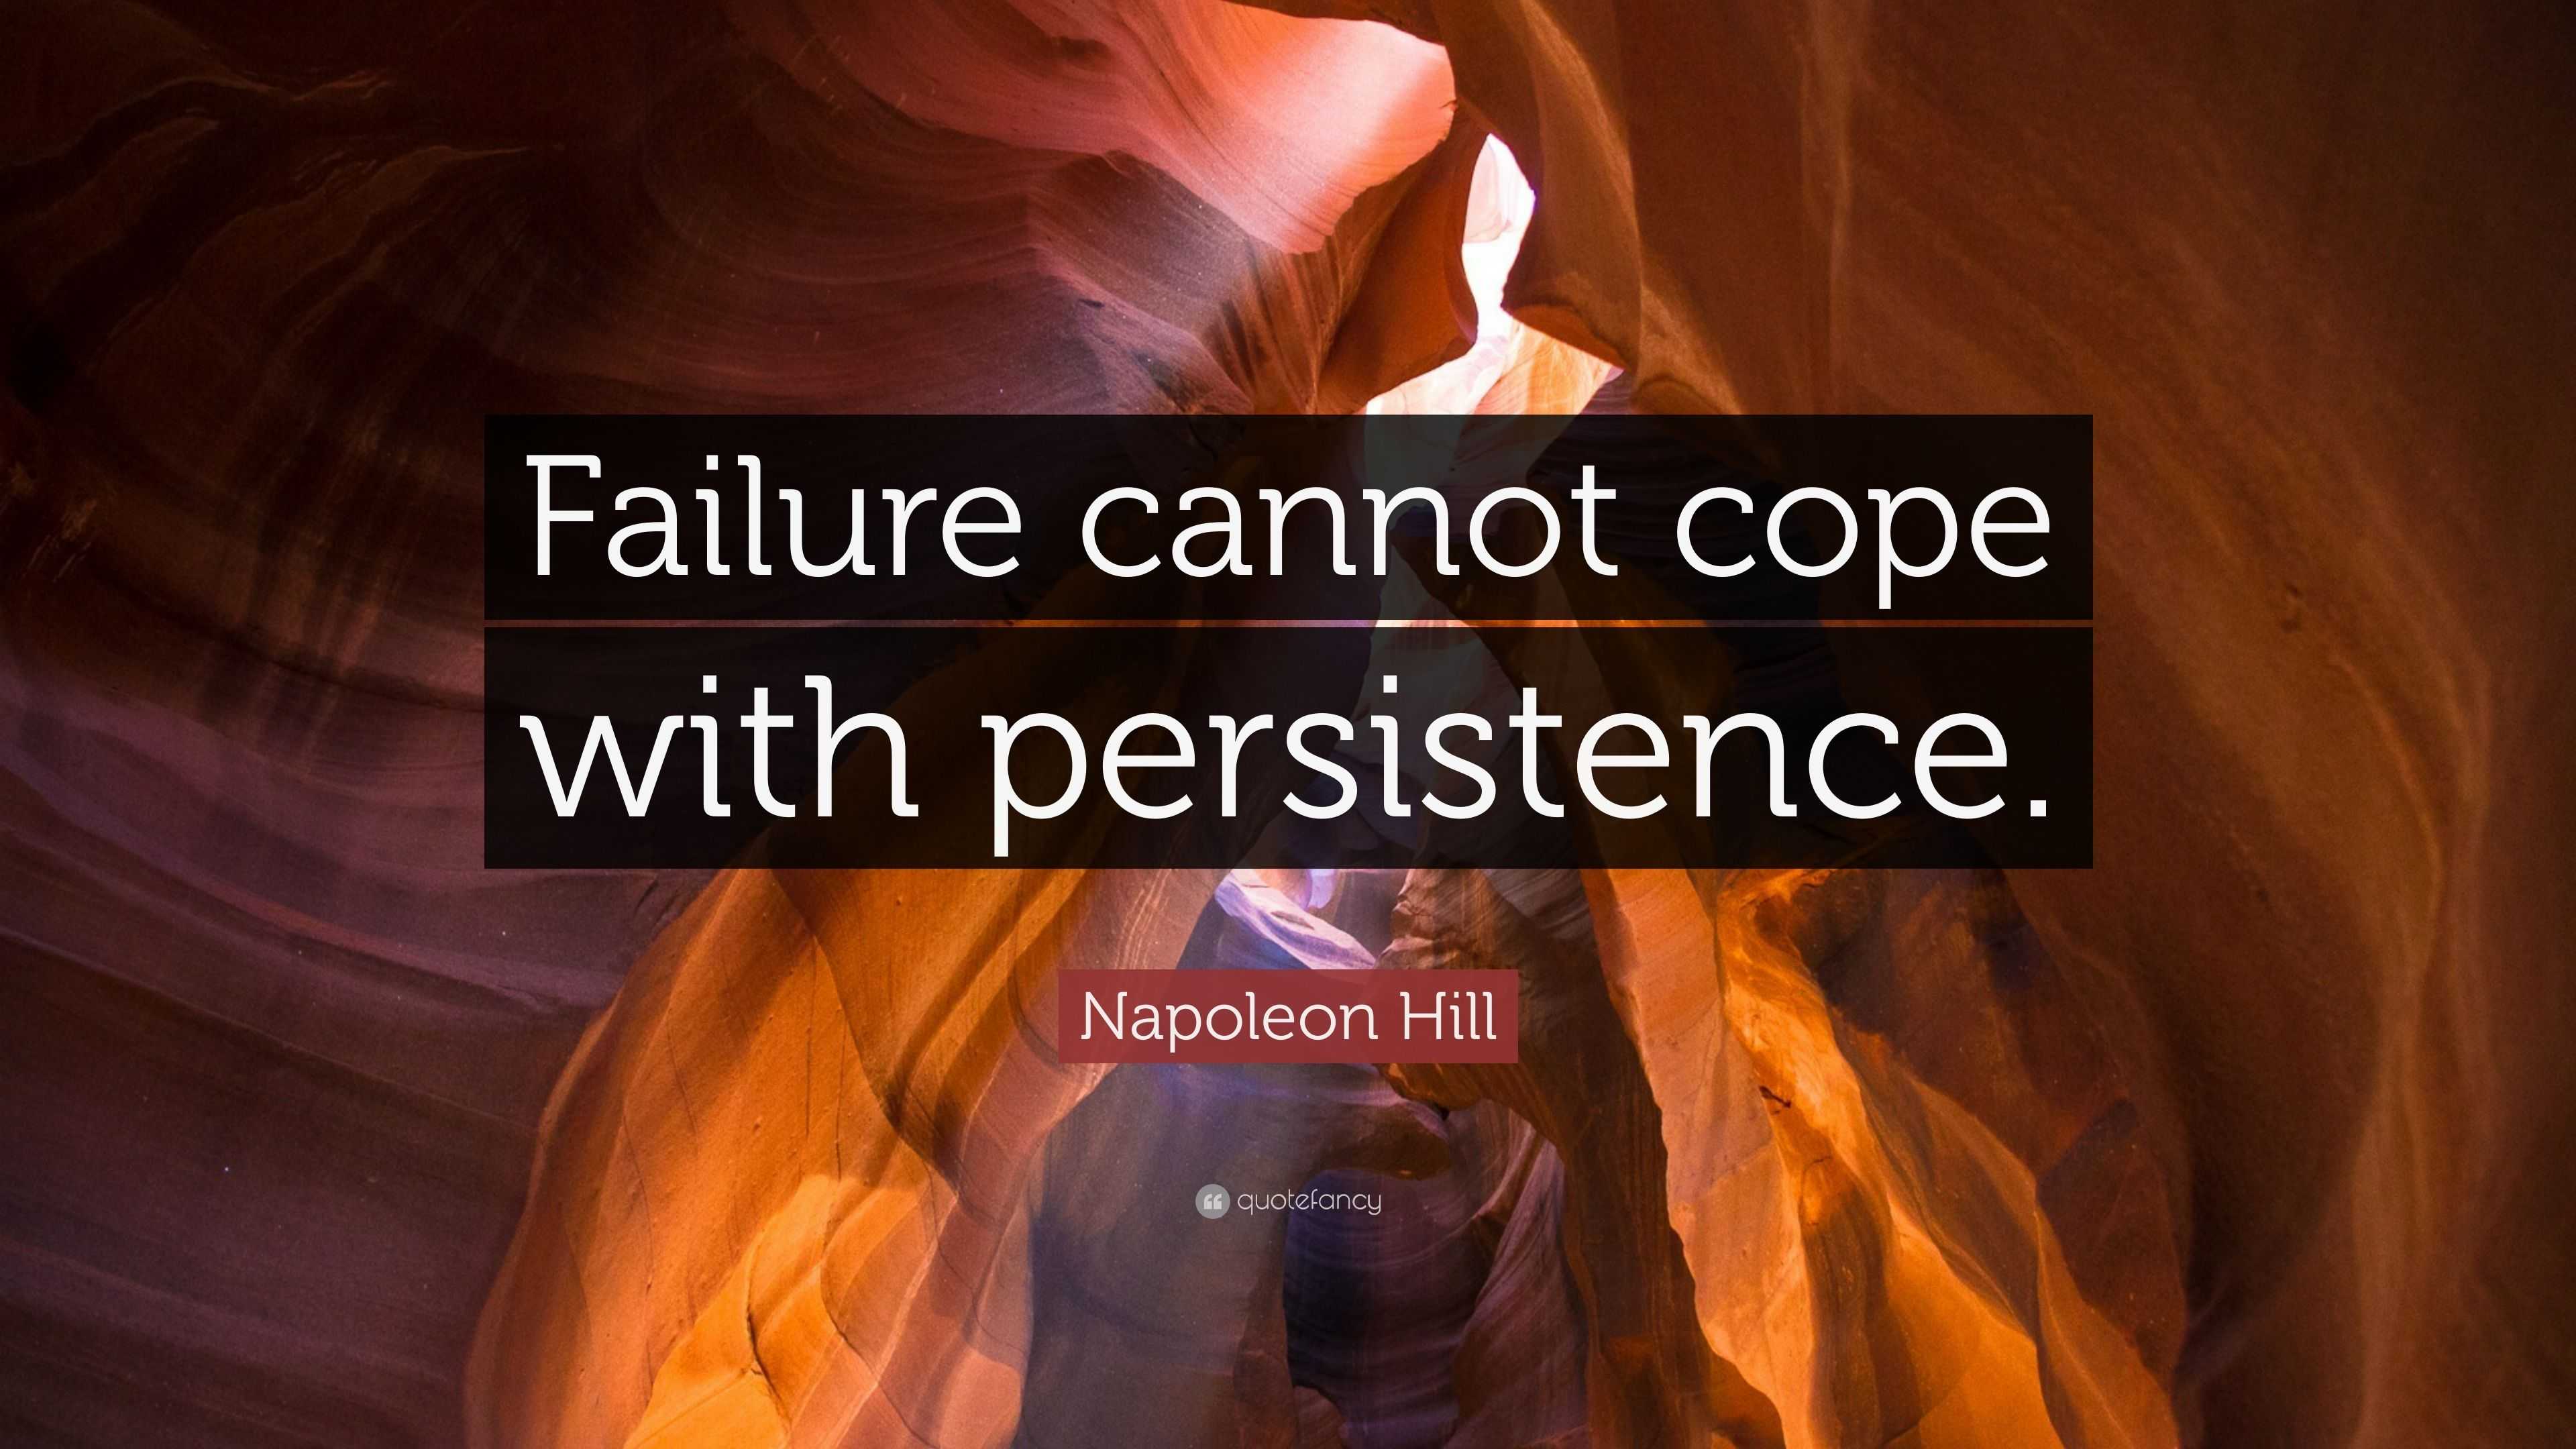 Napoleon Hill Quote: “Failure cannot cope with persistence.”